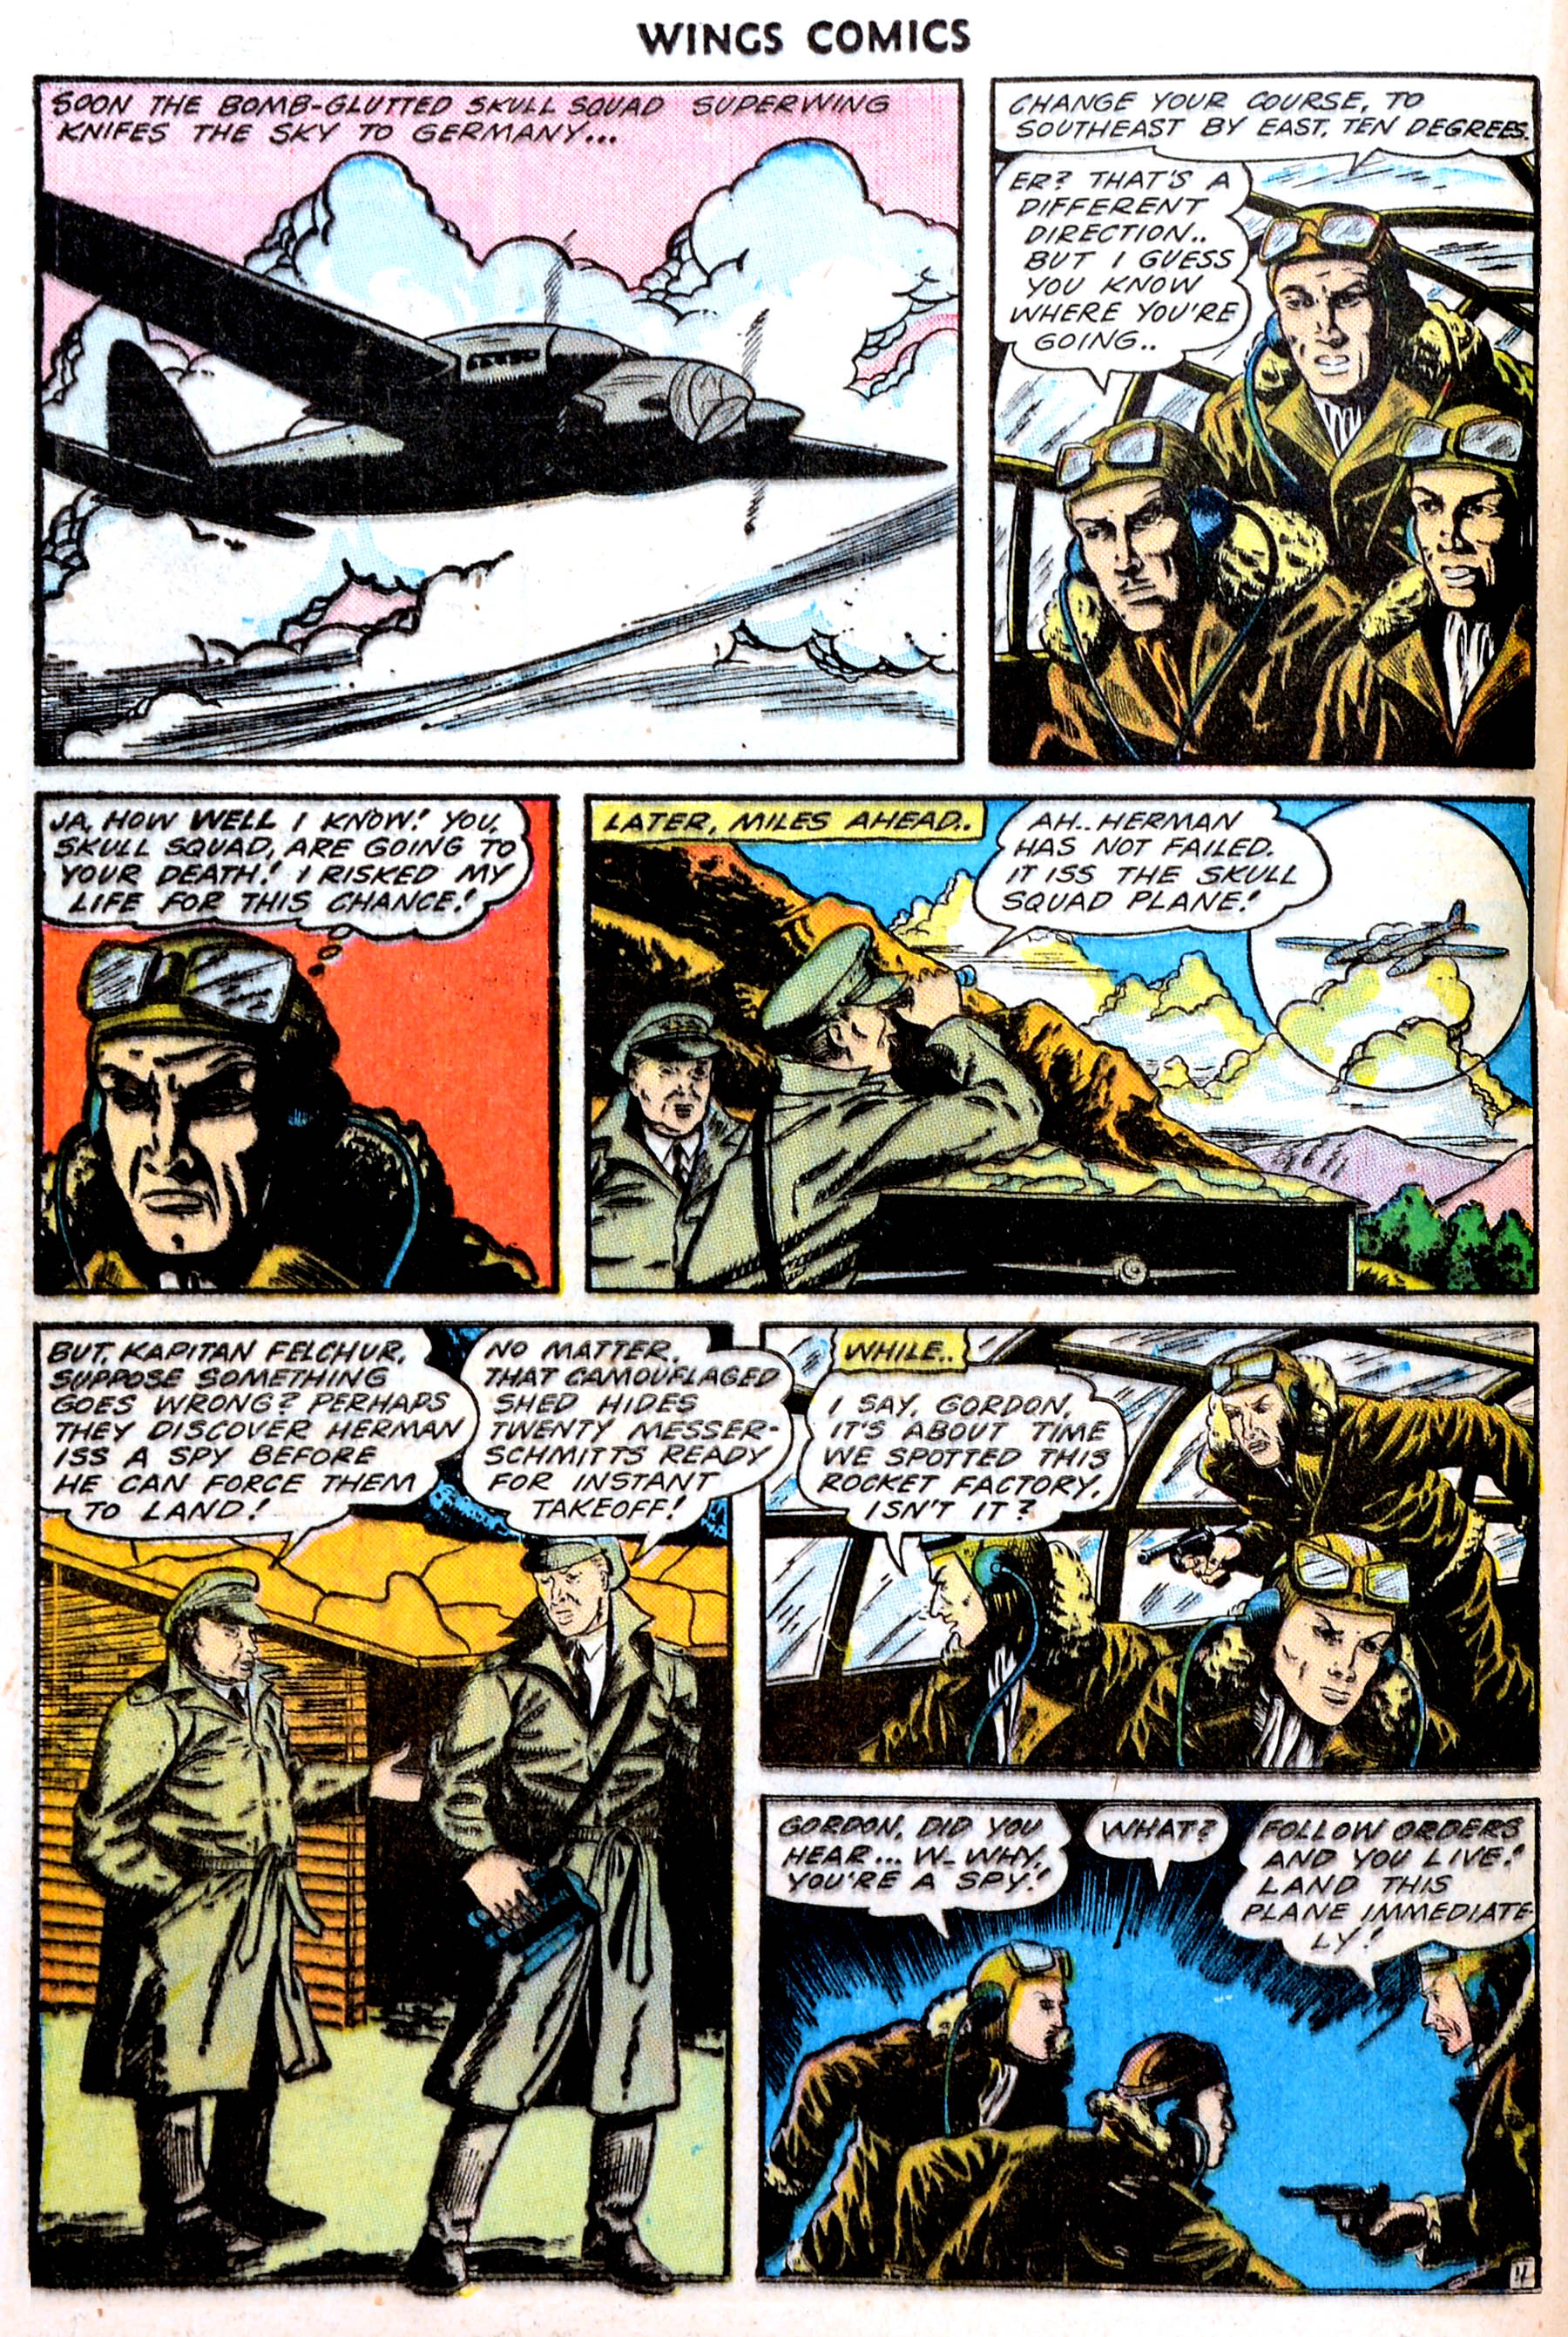 Read online Wings Comics comic -  Issue #47 - 30